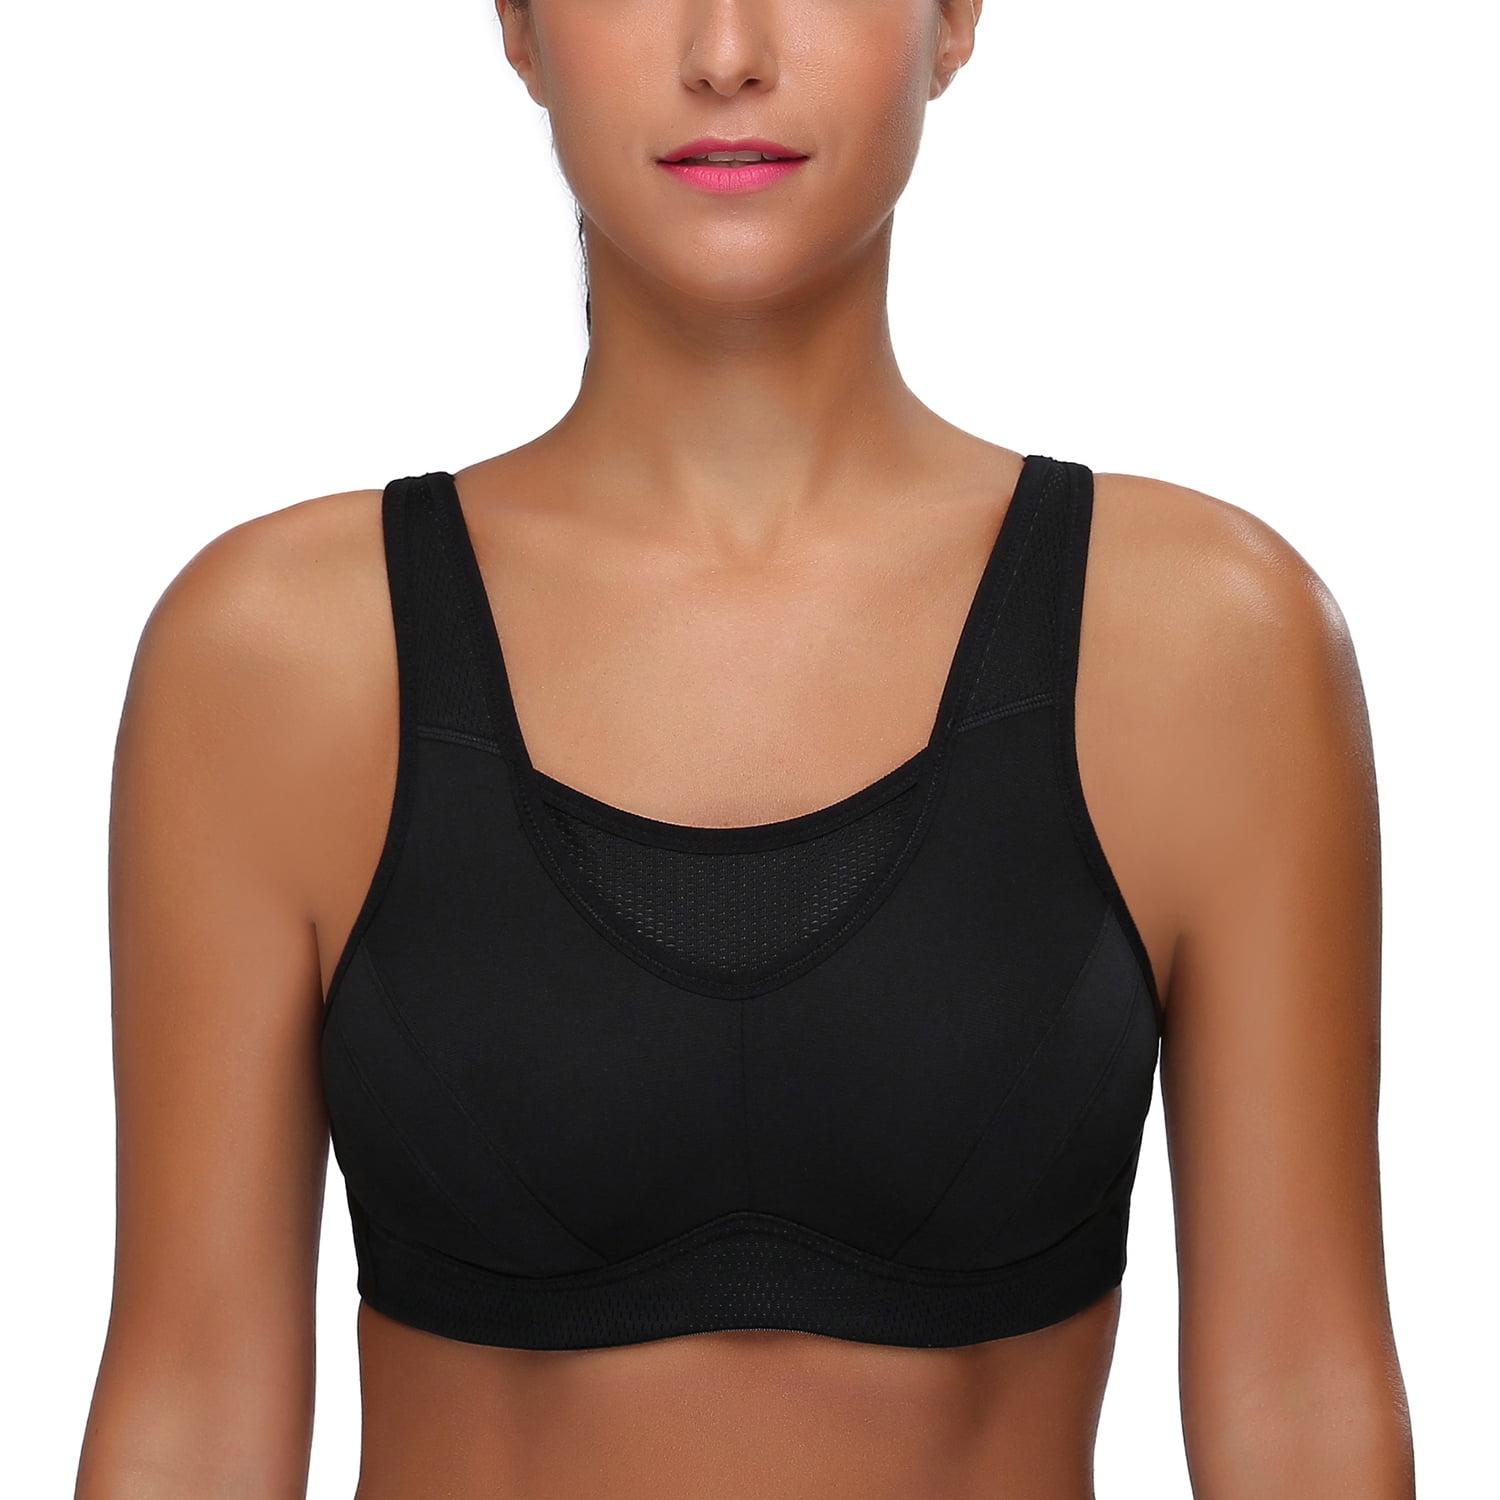 ENELL Cotton Candy High Impact Wire-Free Racerback Sports Bra, US